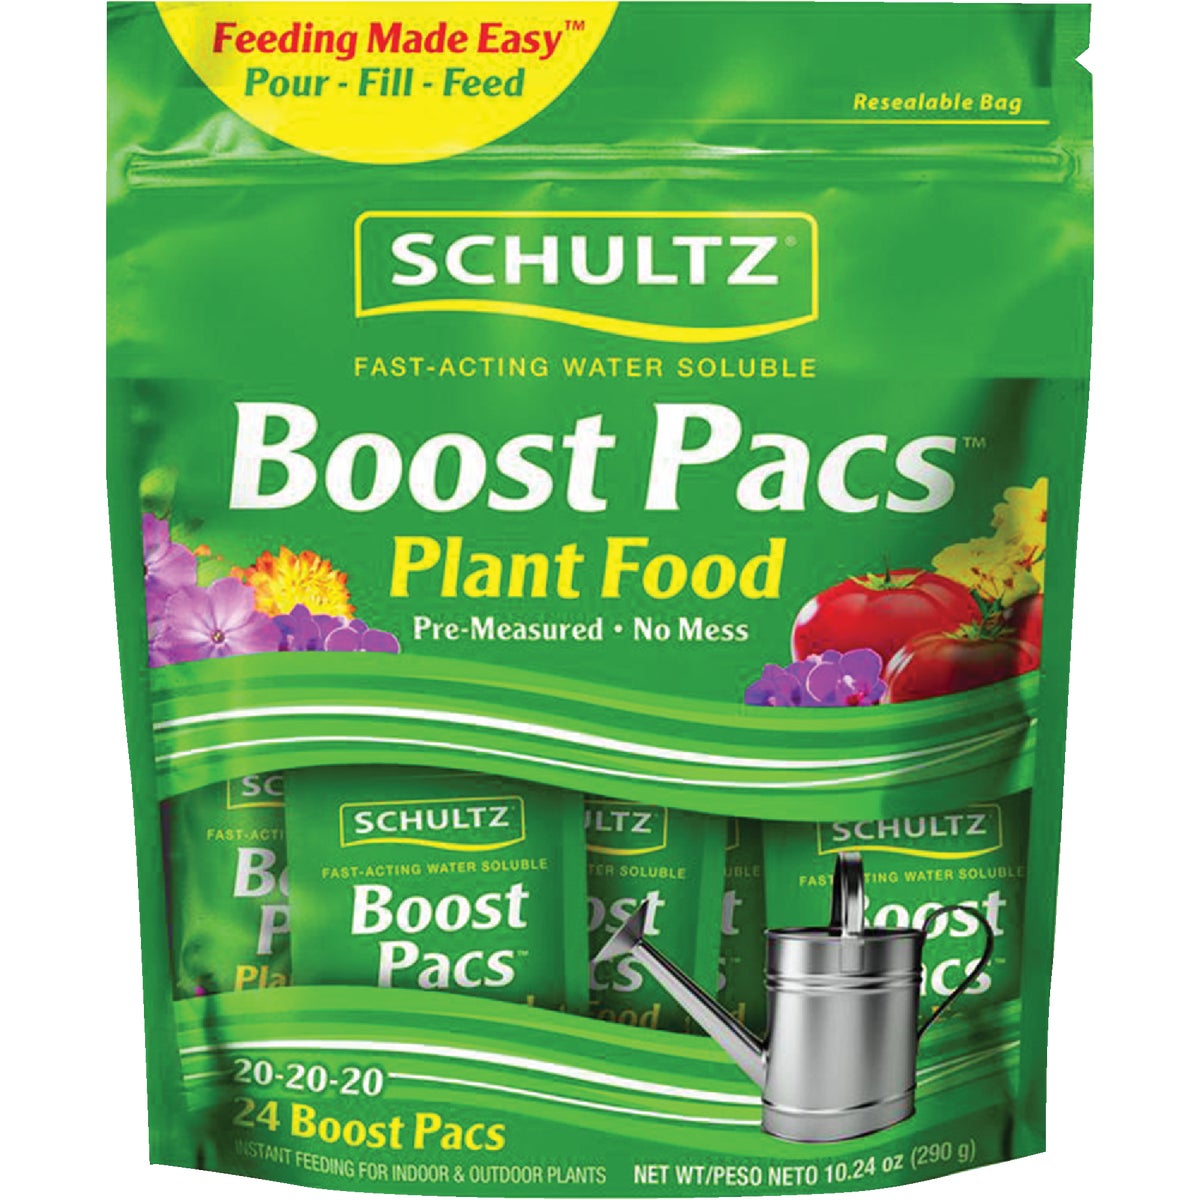 Schultz Boost Pacs 10.24 Oz. 20-20-20 Dry Plant Food (24-Pack)